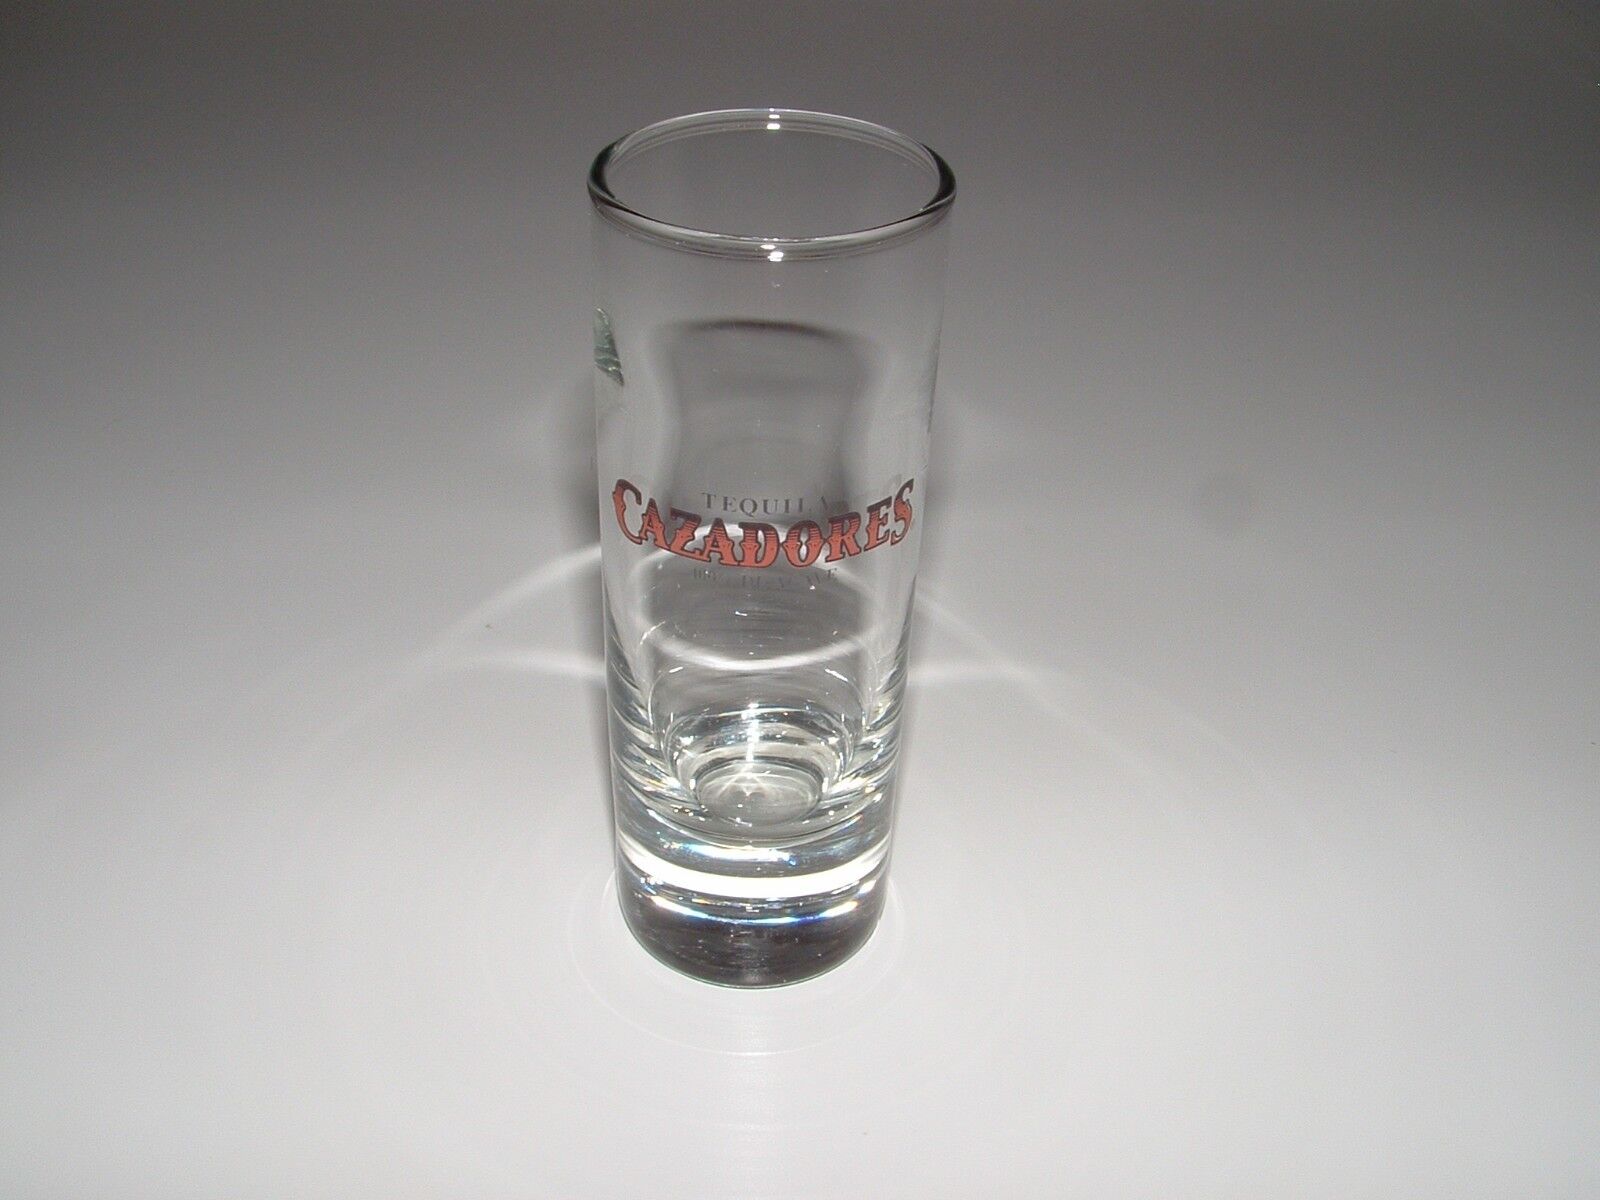 Tequila Cazadores 100% de Agave Tall Shot Glass, Age Unknown, pre-owned